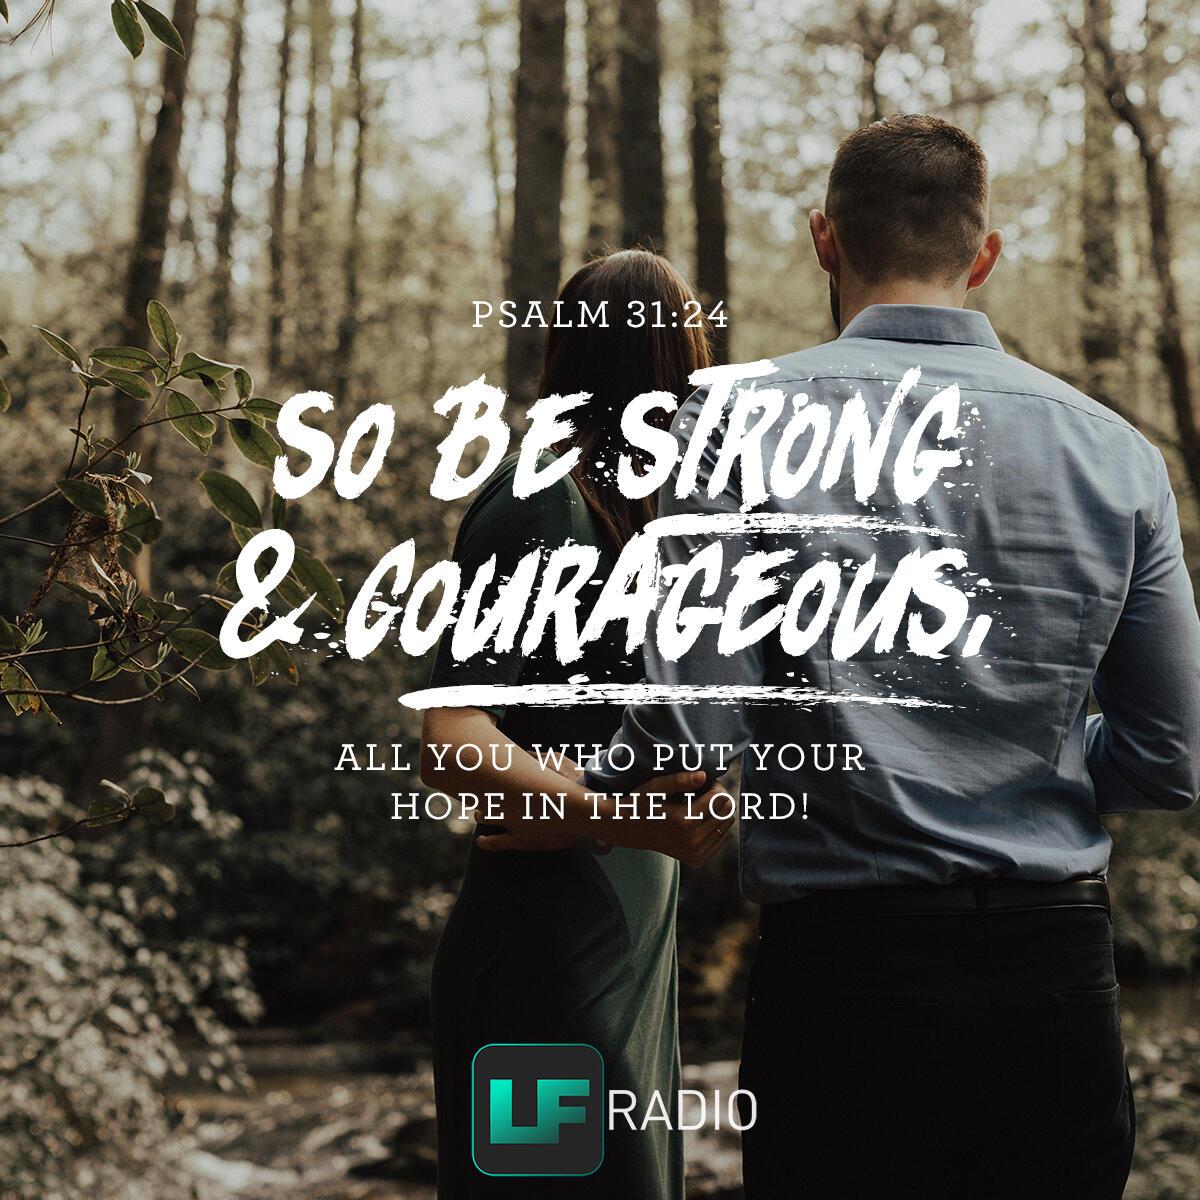 Psalm 31:24 - Verse of the Day